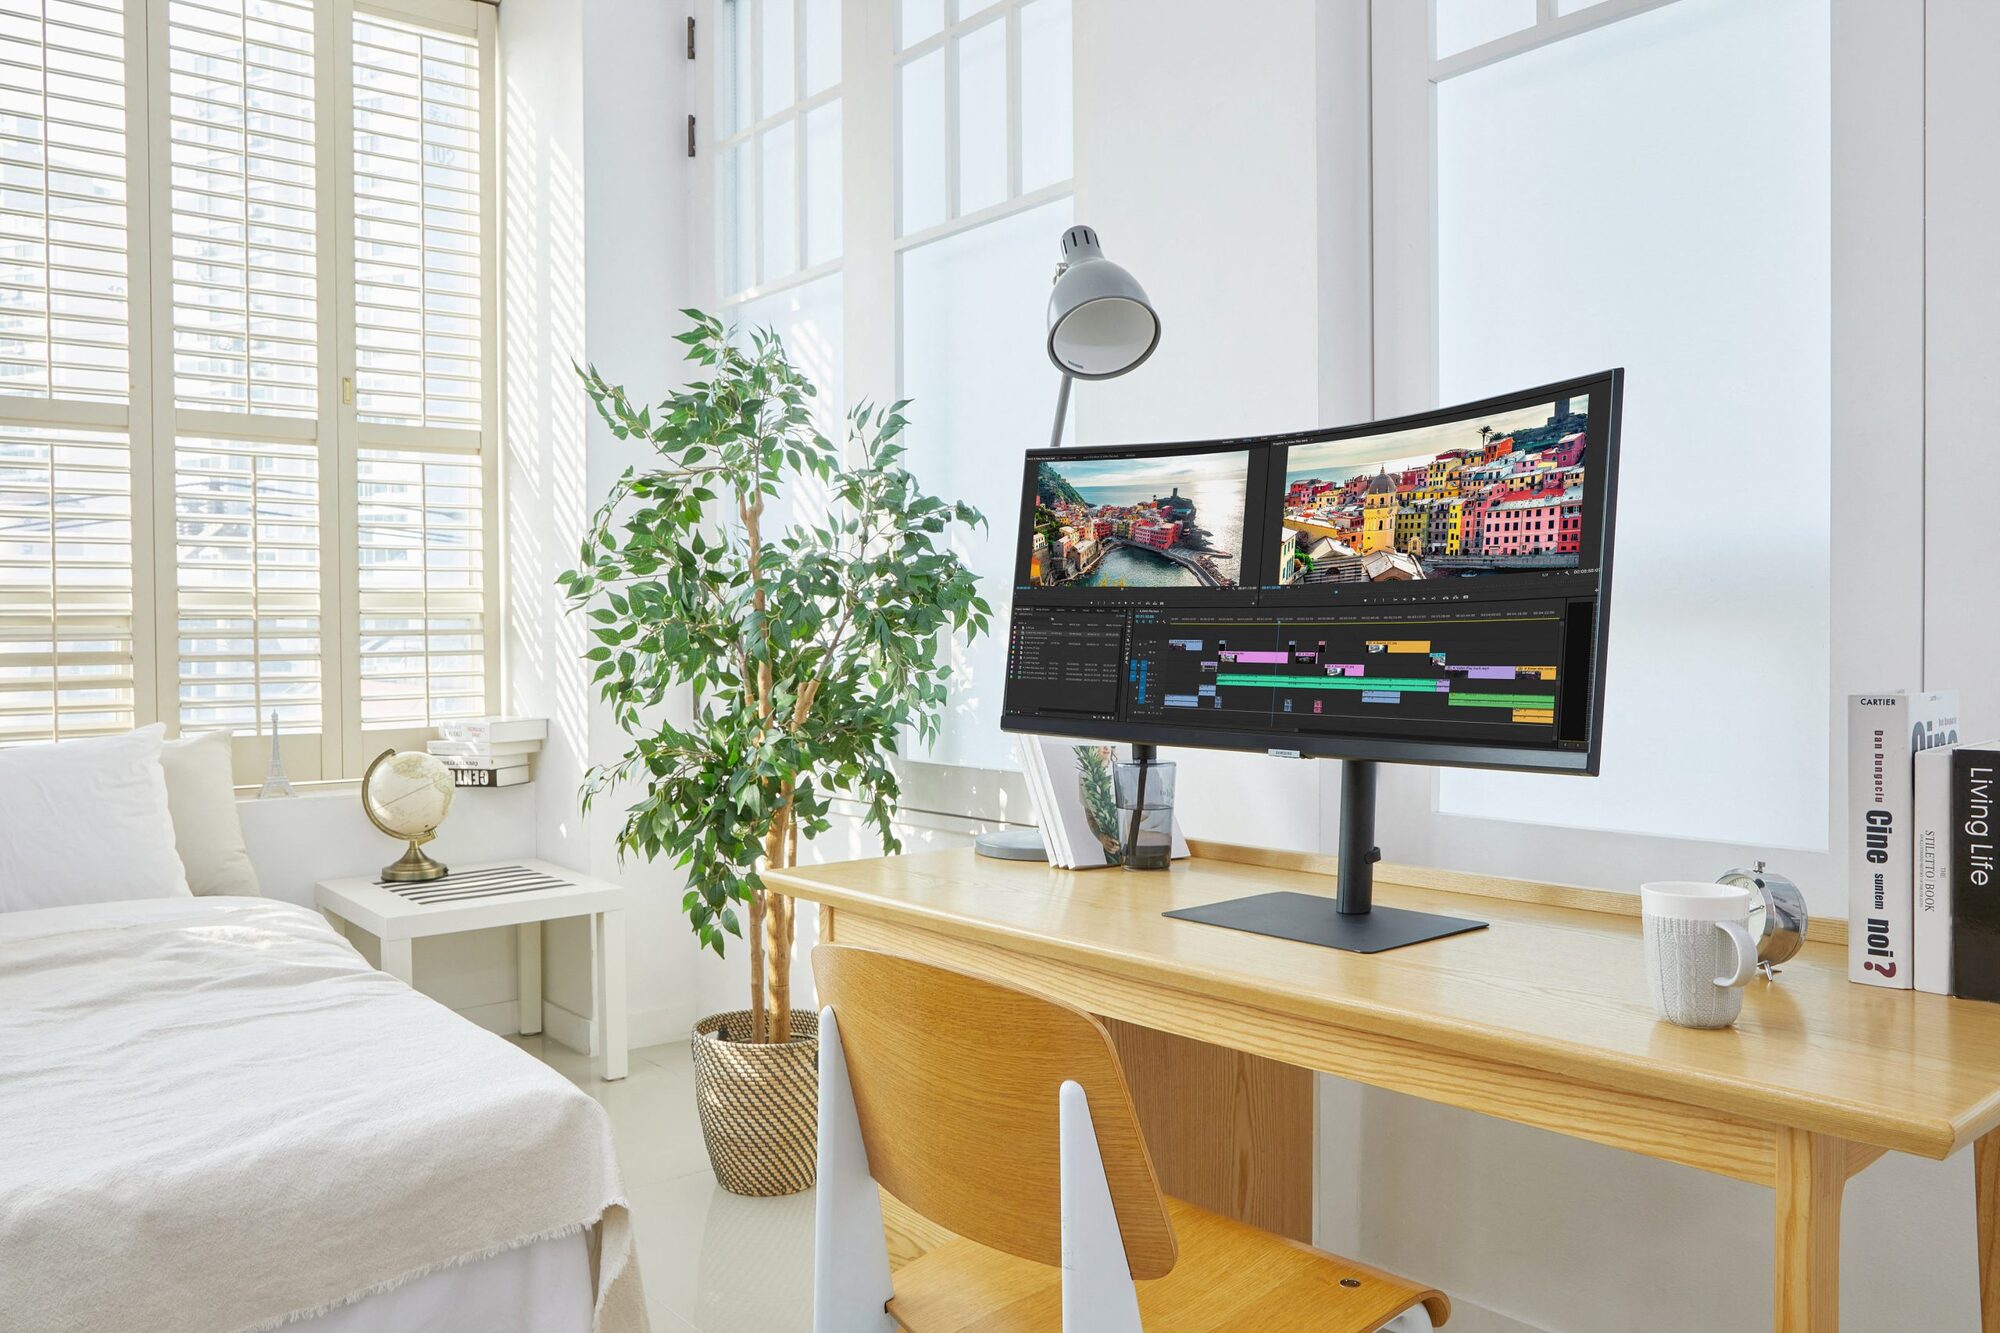 Samsung Launches New High-Resolution 2021 Monitor Lineup Photo-Samsung-Launches-New-High-Resolution-2021-Monitor-Lineup-4-scaled.jpg